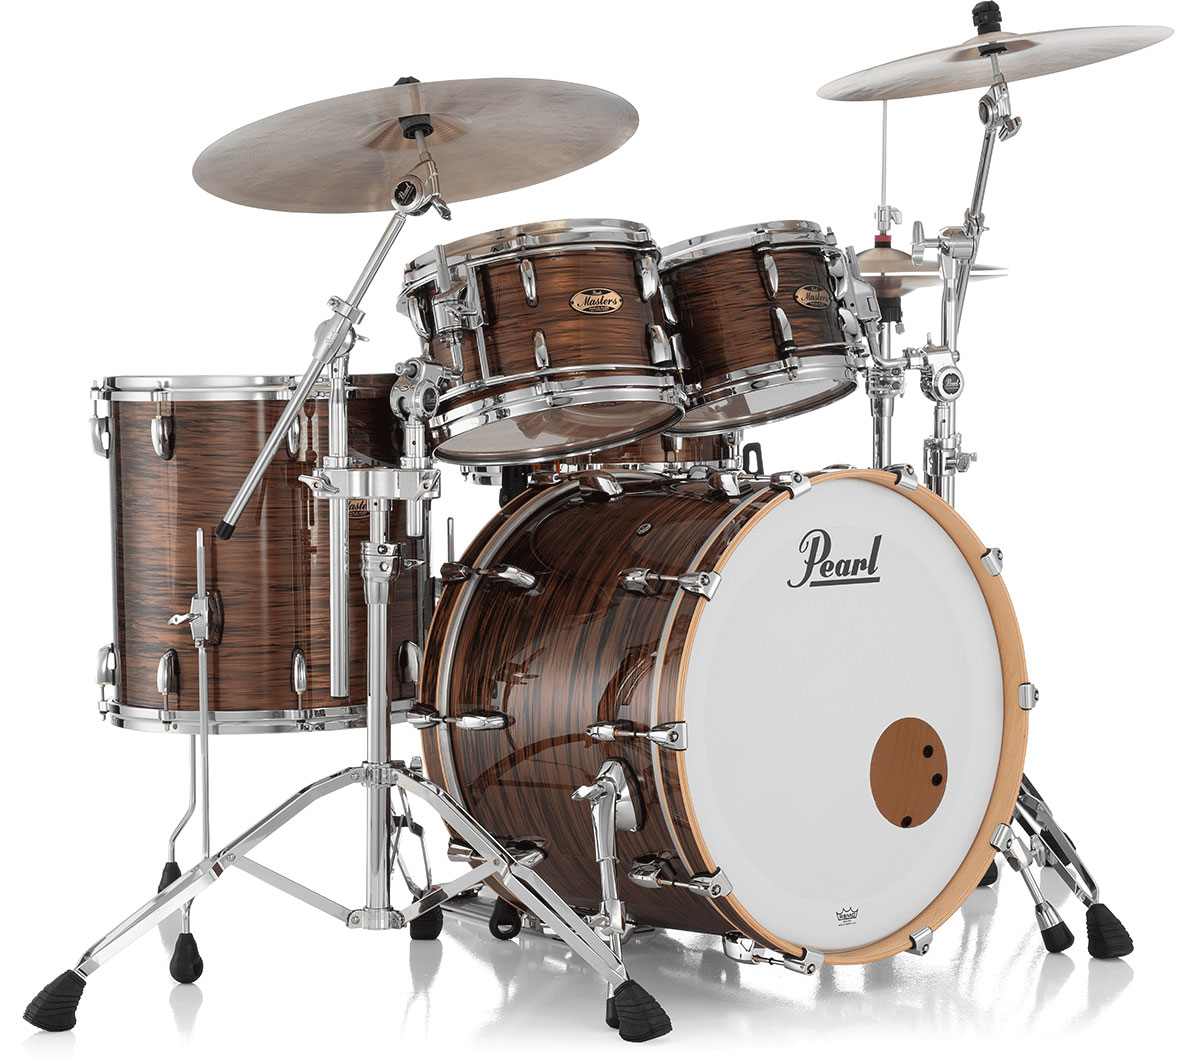 PEARL DRUMS MASTERS MAPLE PURE STAGE 22 BRONZE OYSTER